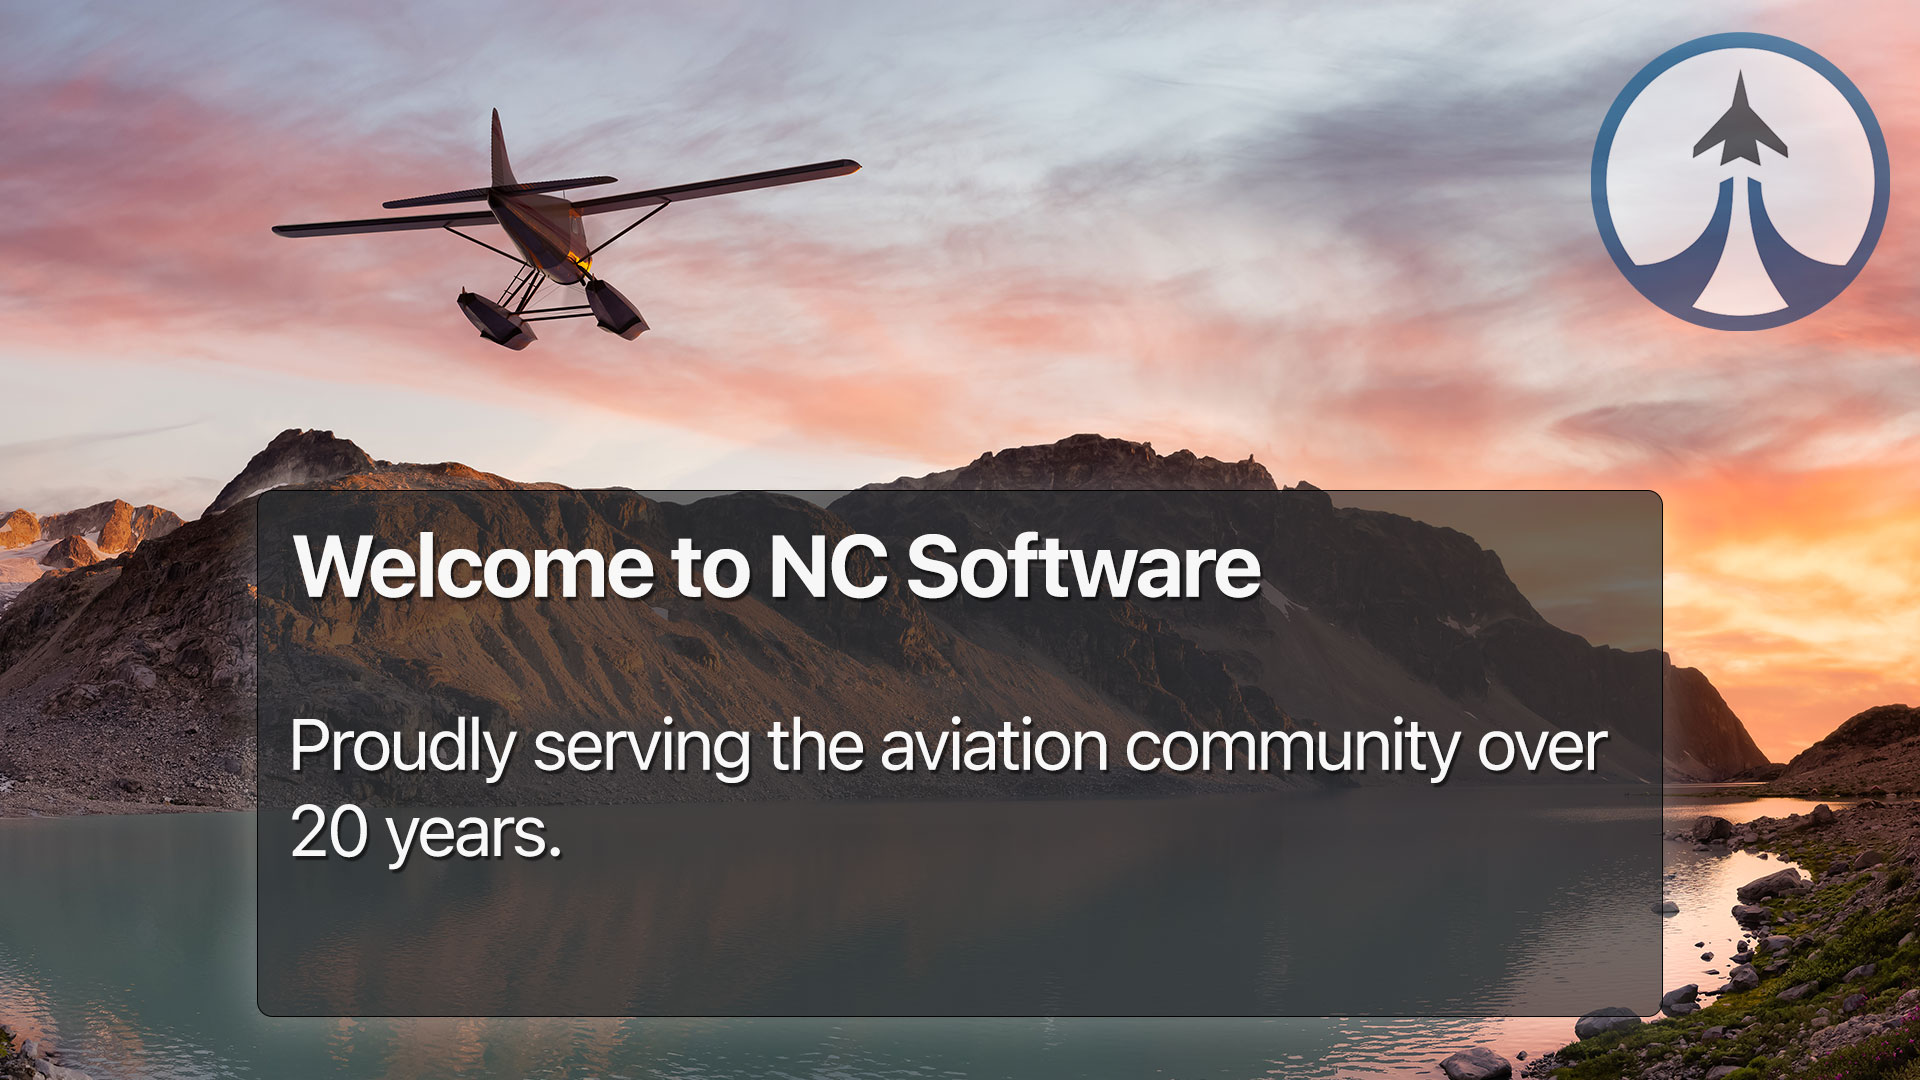 Welcome to NC Software - home of Logbook Pro Pilot Logbook Software, APDL - Airline Pilot Logbook, Cirrus Elite premium logbook covers for pilots, logbook printing services, and more.